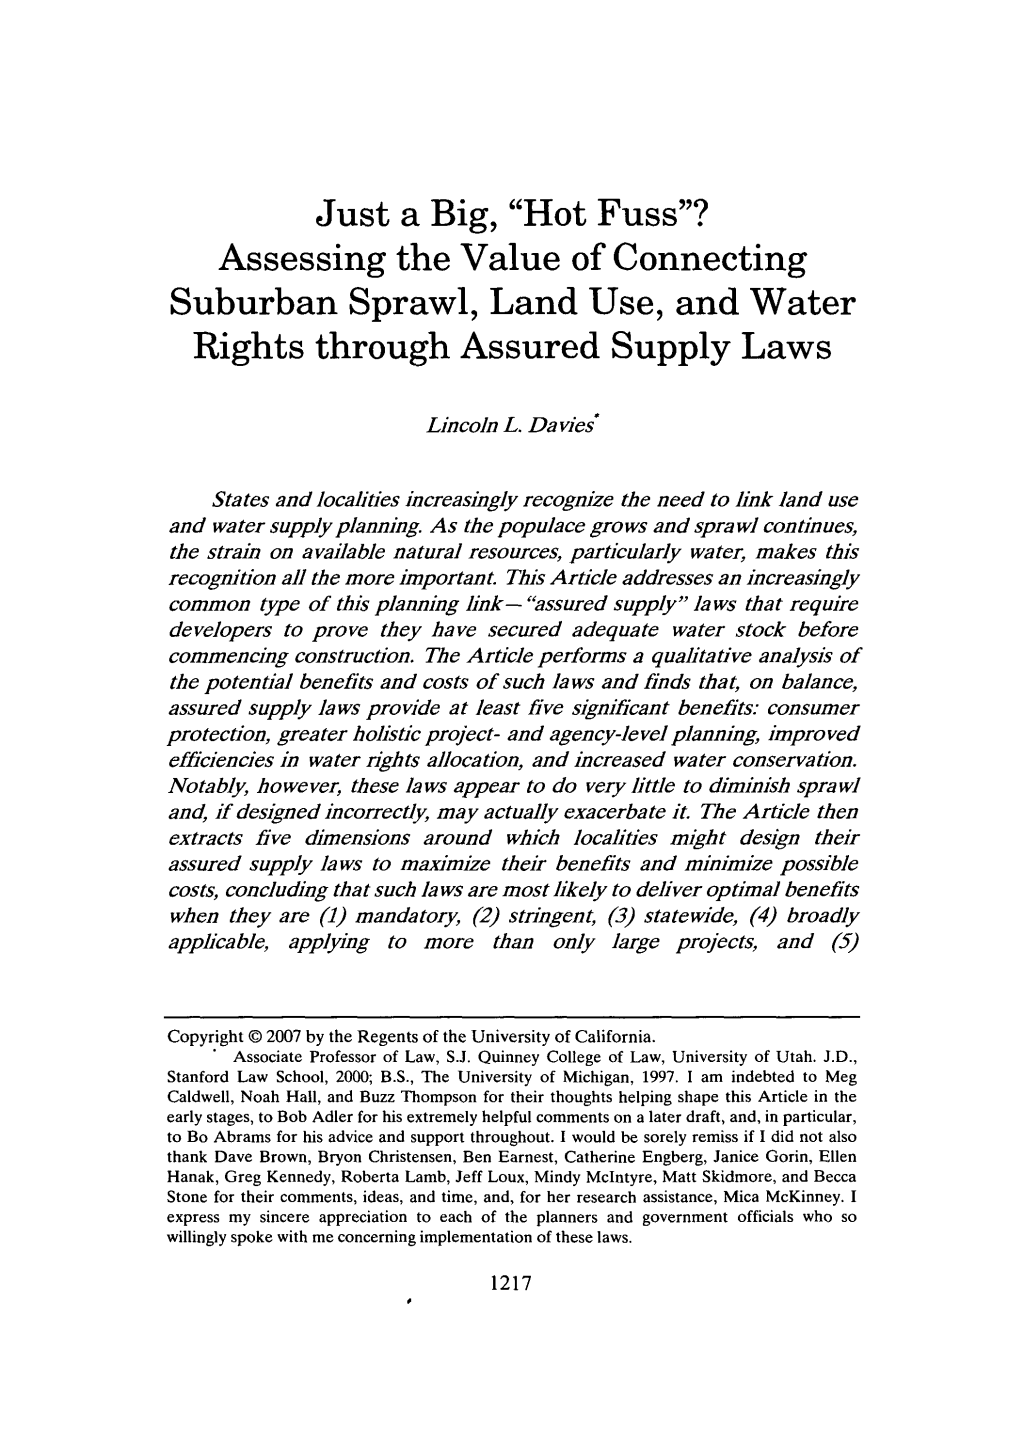 Assessing the Value of Connecting Suburban Sprawl, Land Use, and Water Rights Through Assured Supply Laws